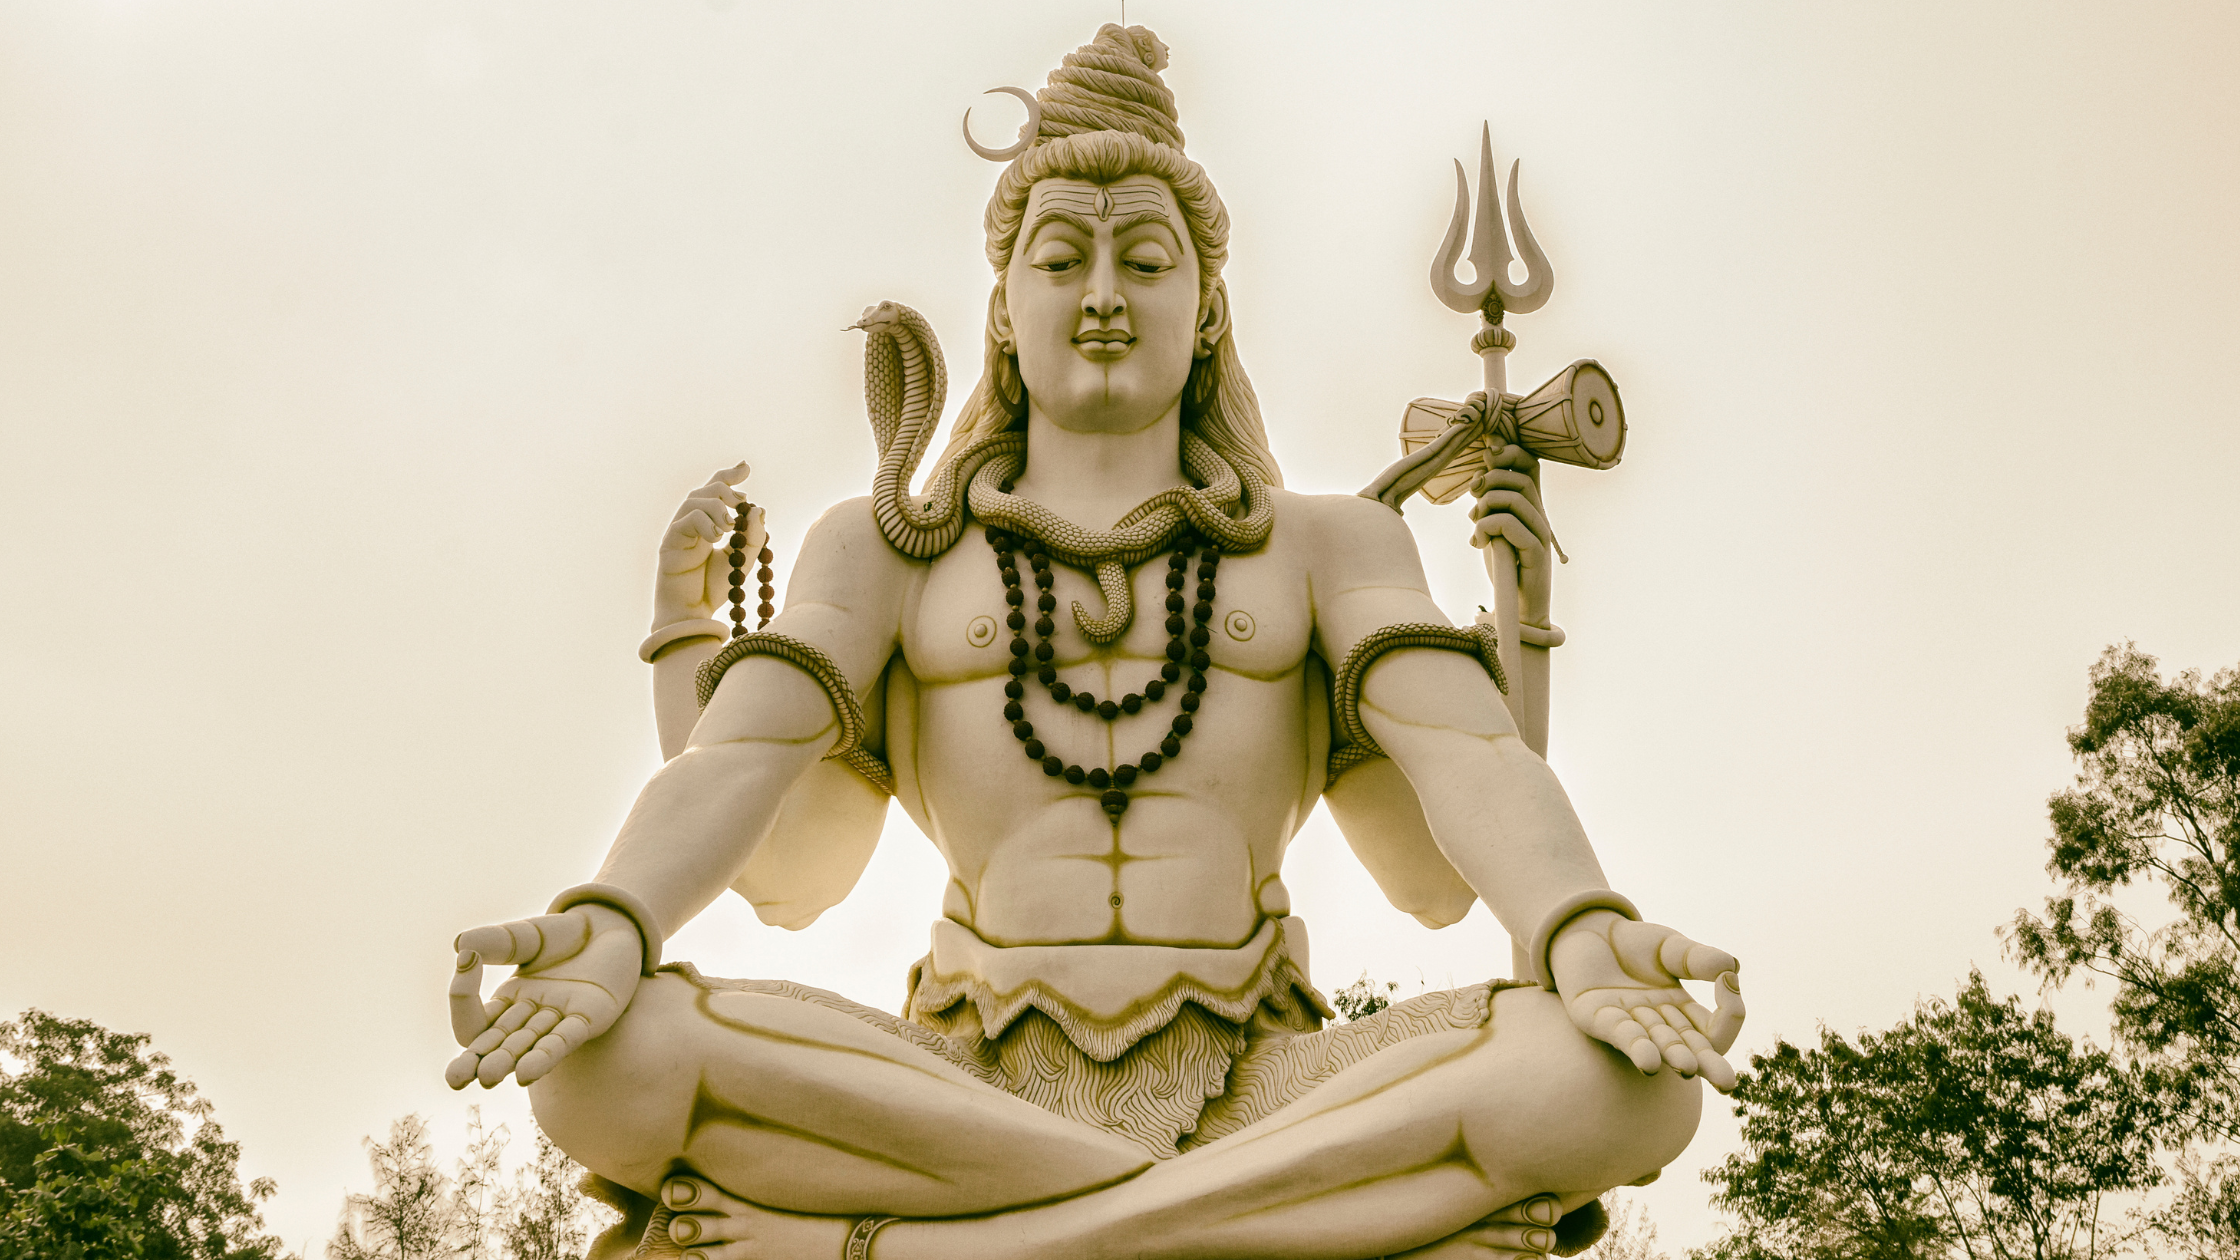 What are the 6 Avatars of Lord Shiva?